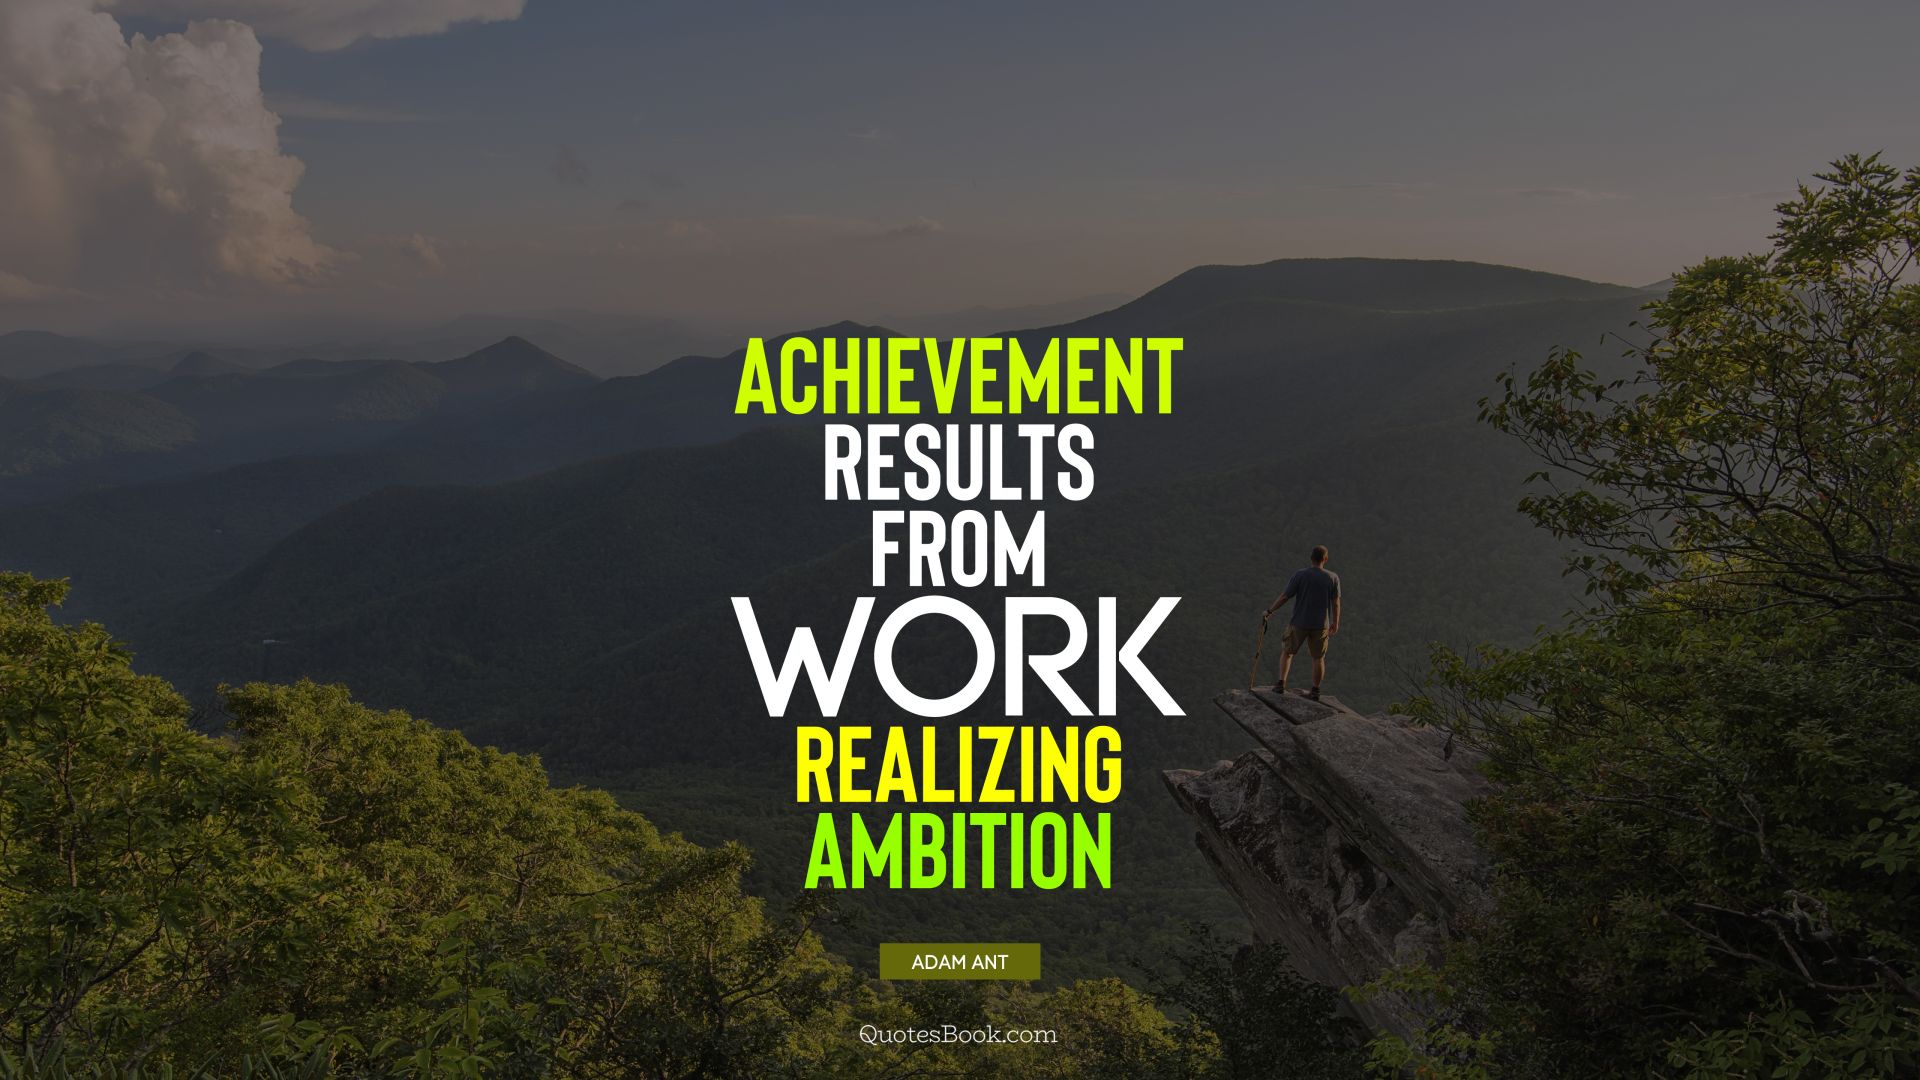 Achievement results from work realizing ambition. - Quote by Adam Ant